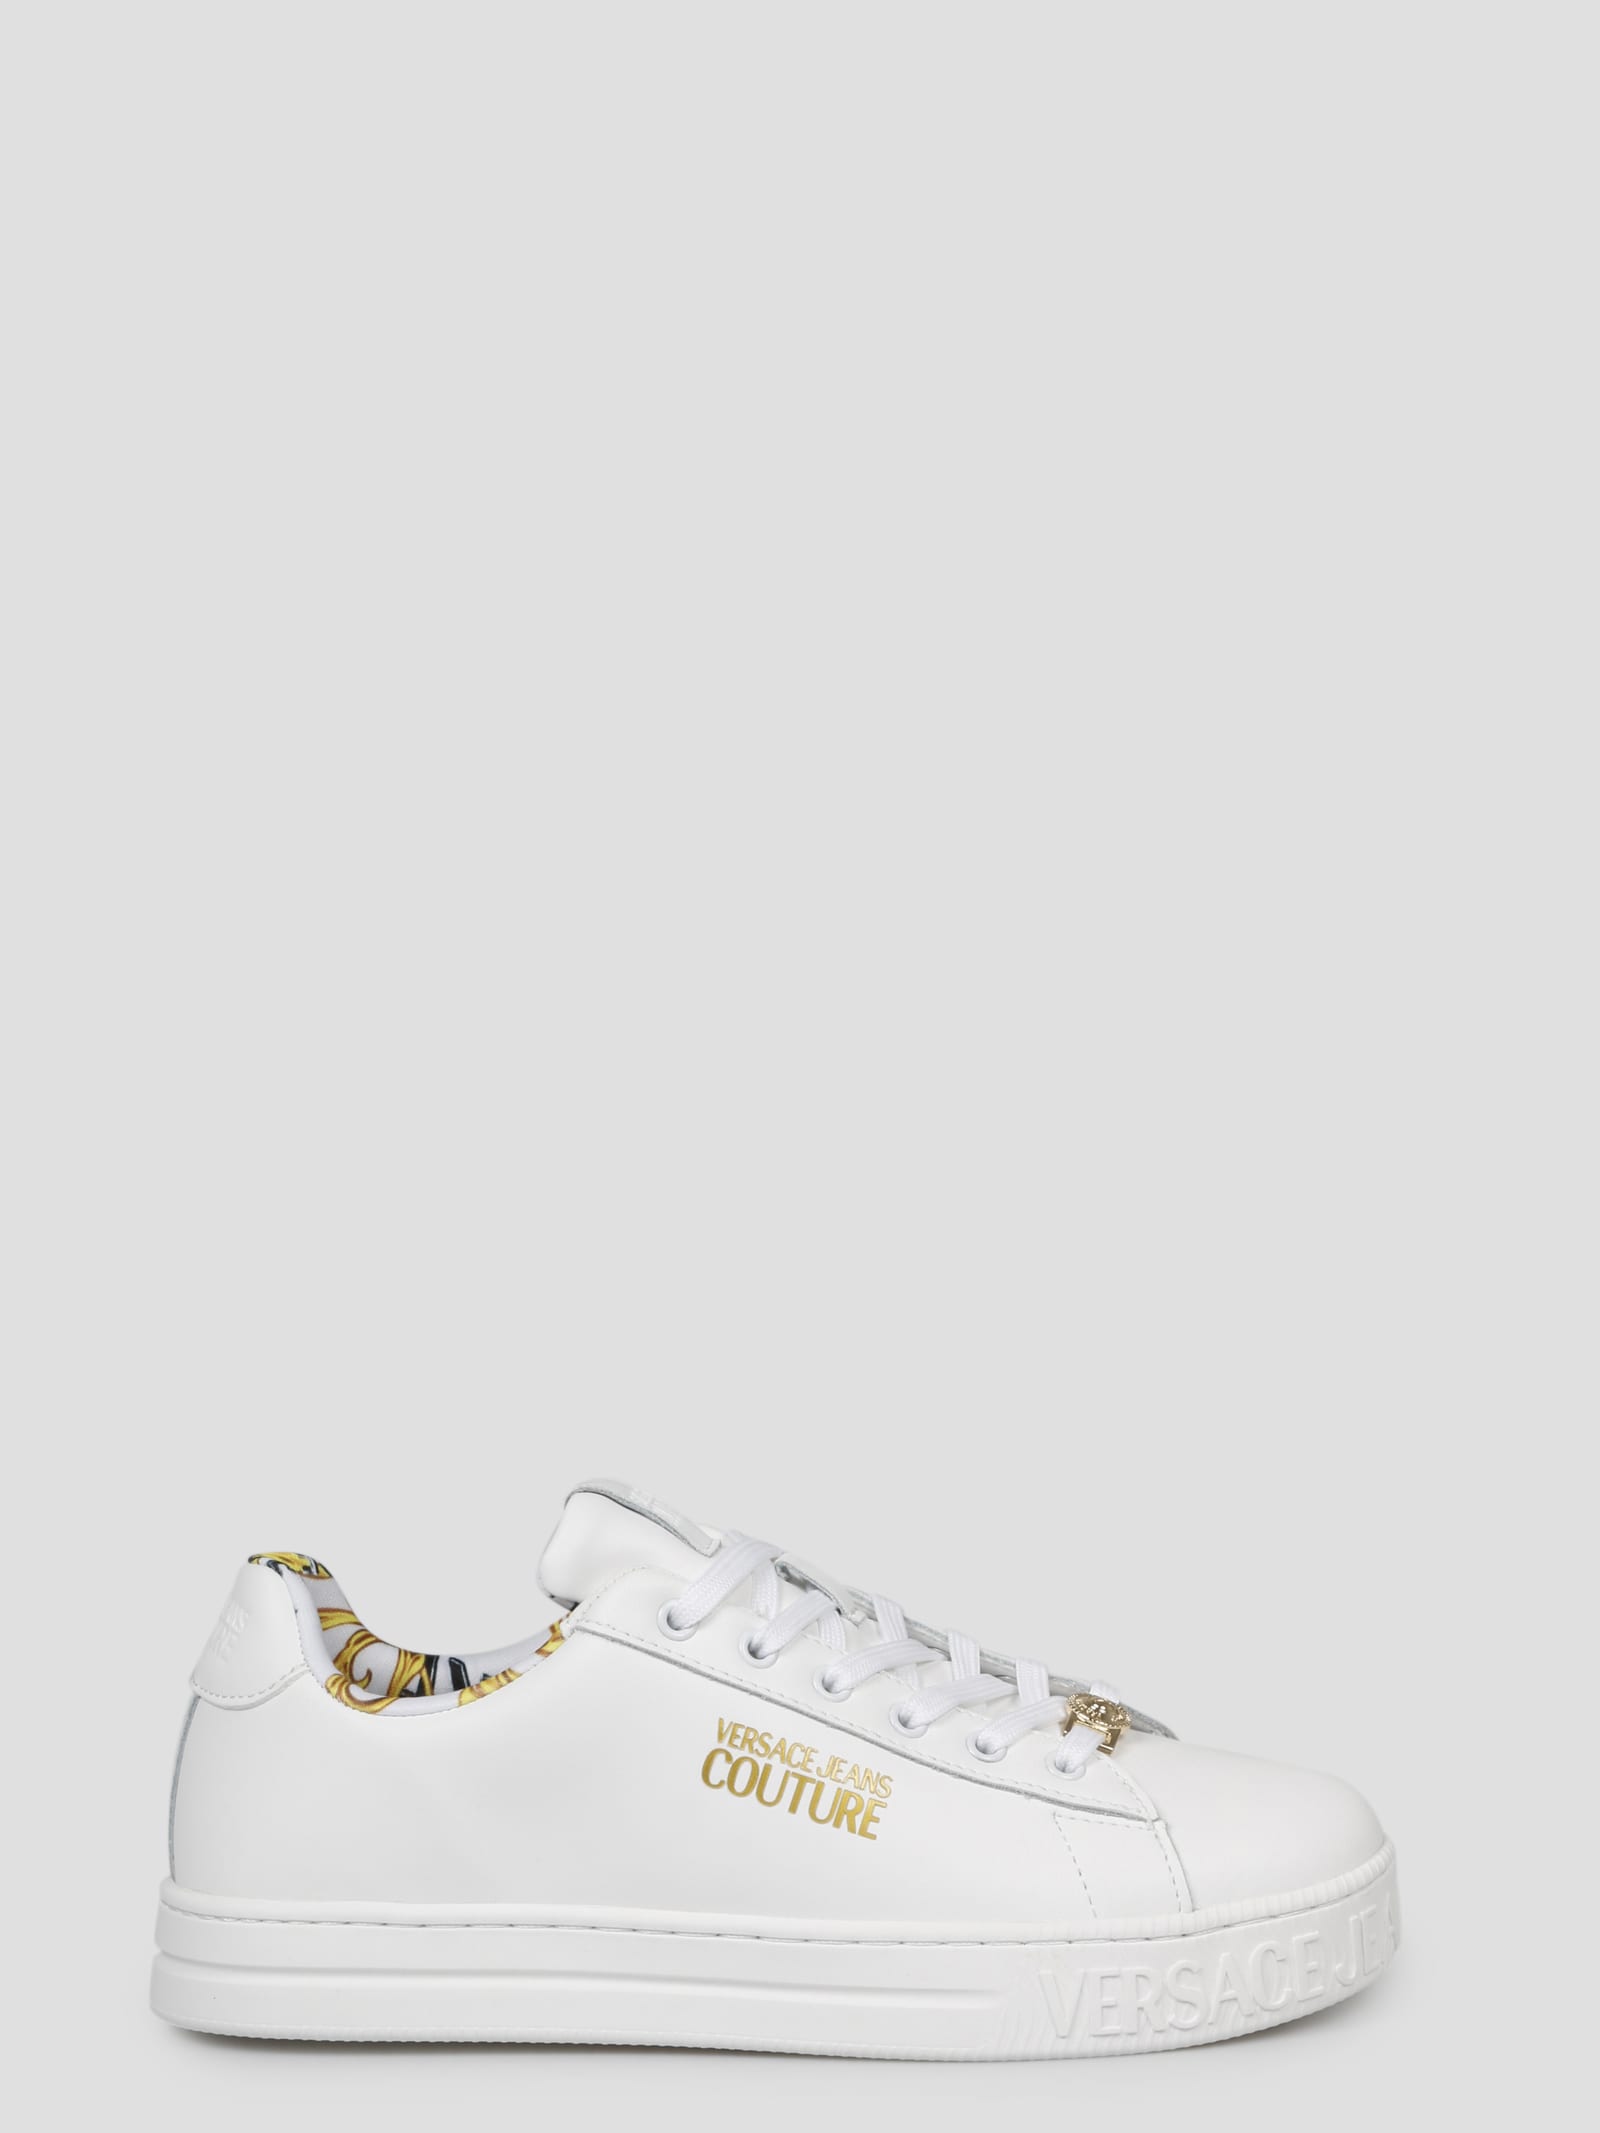 VERSACE JEANS COUTURE COURT 88 LOGO COUTURE trainers